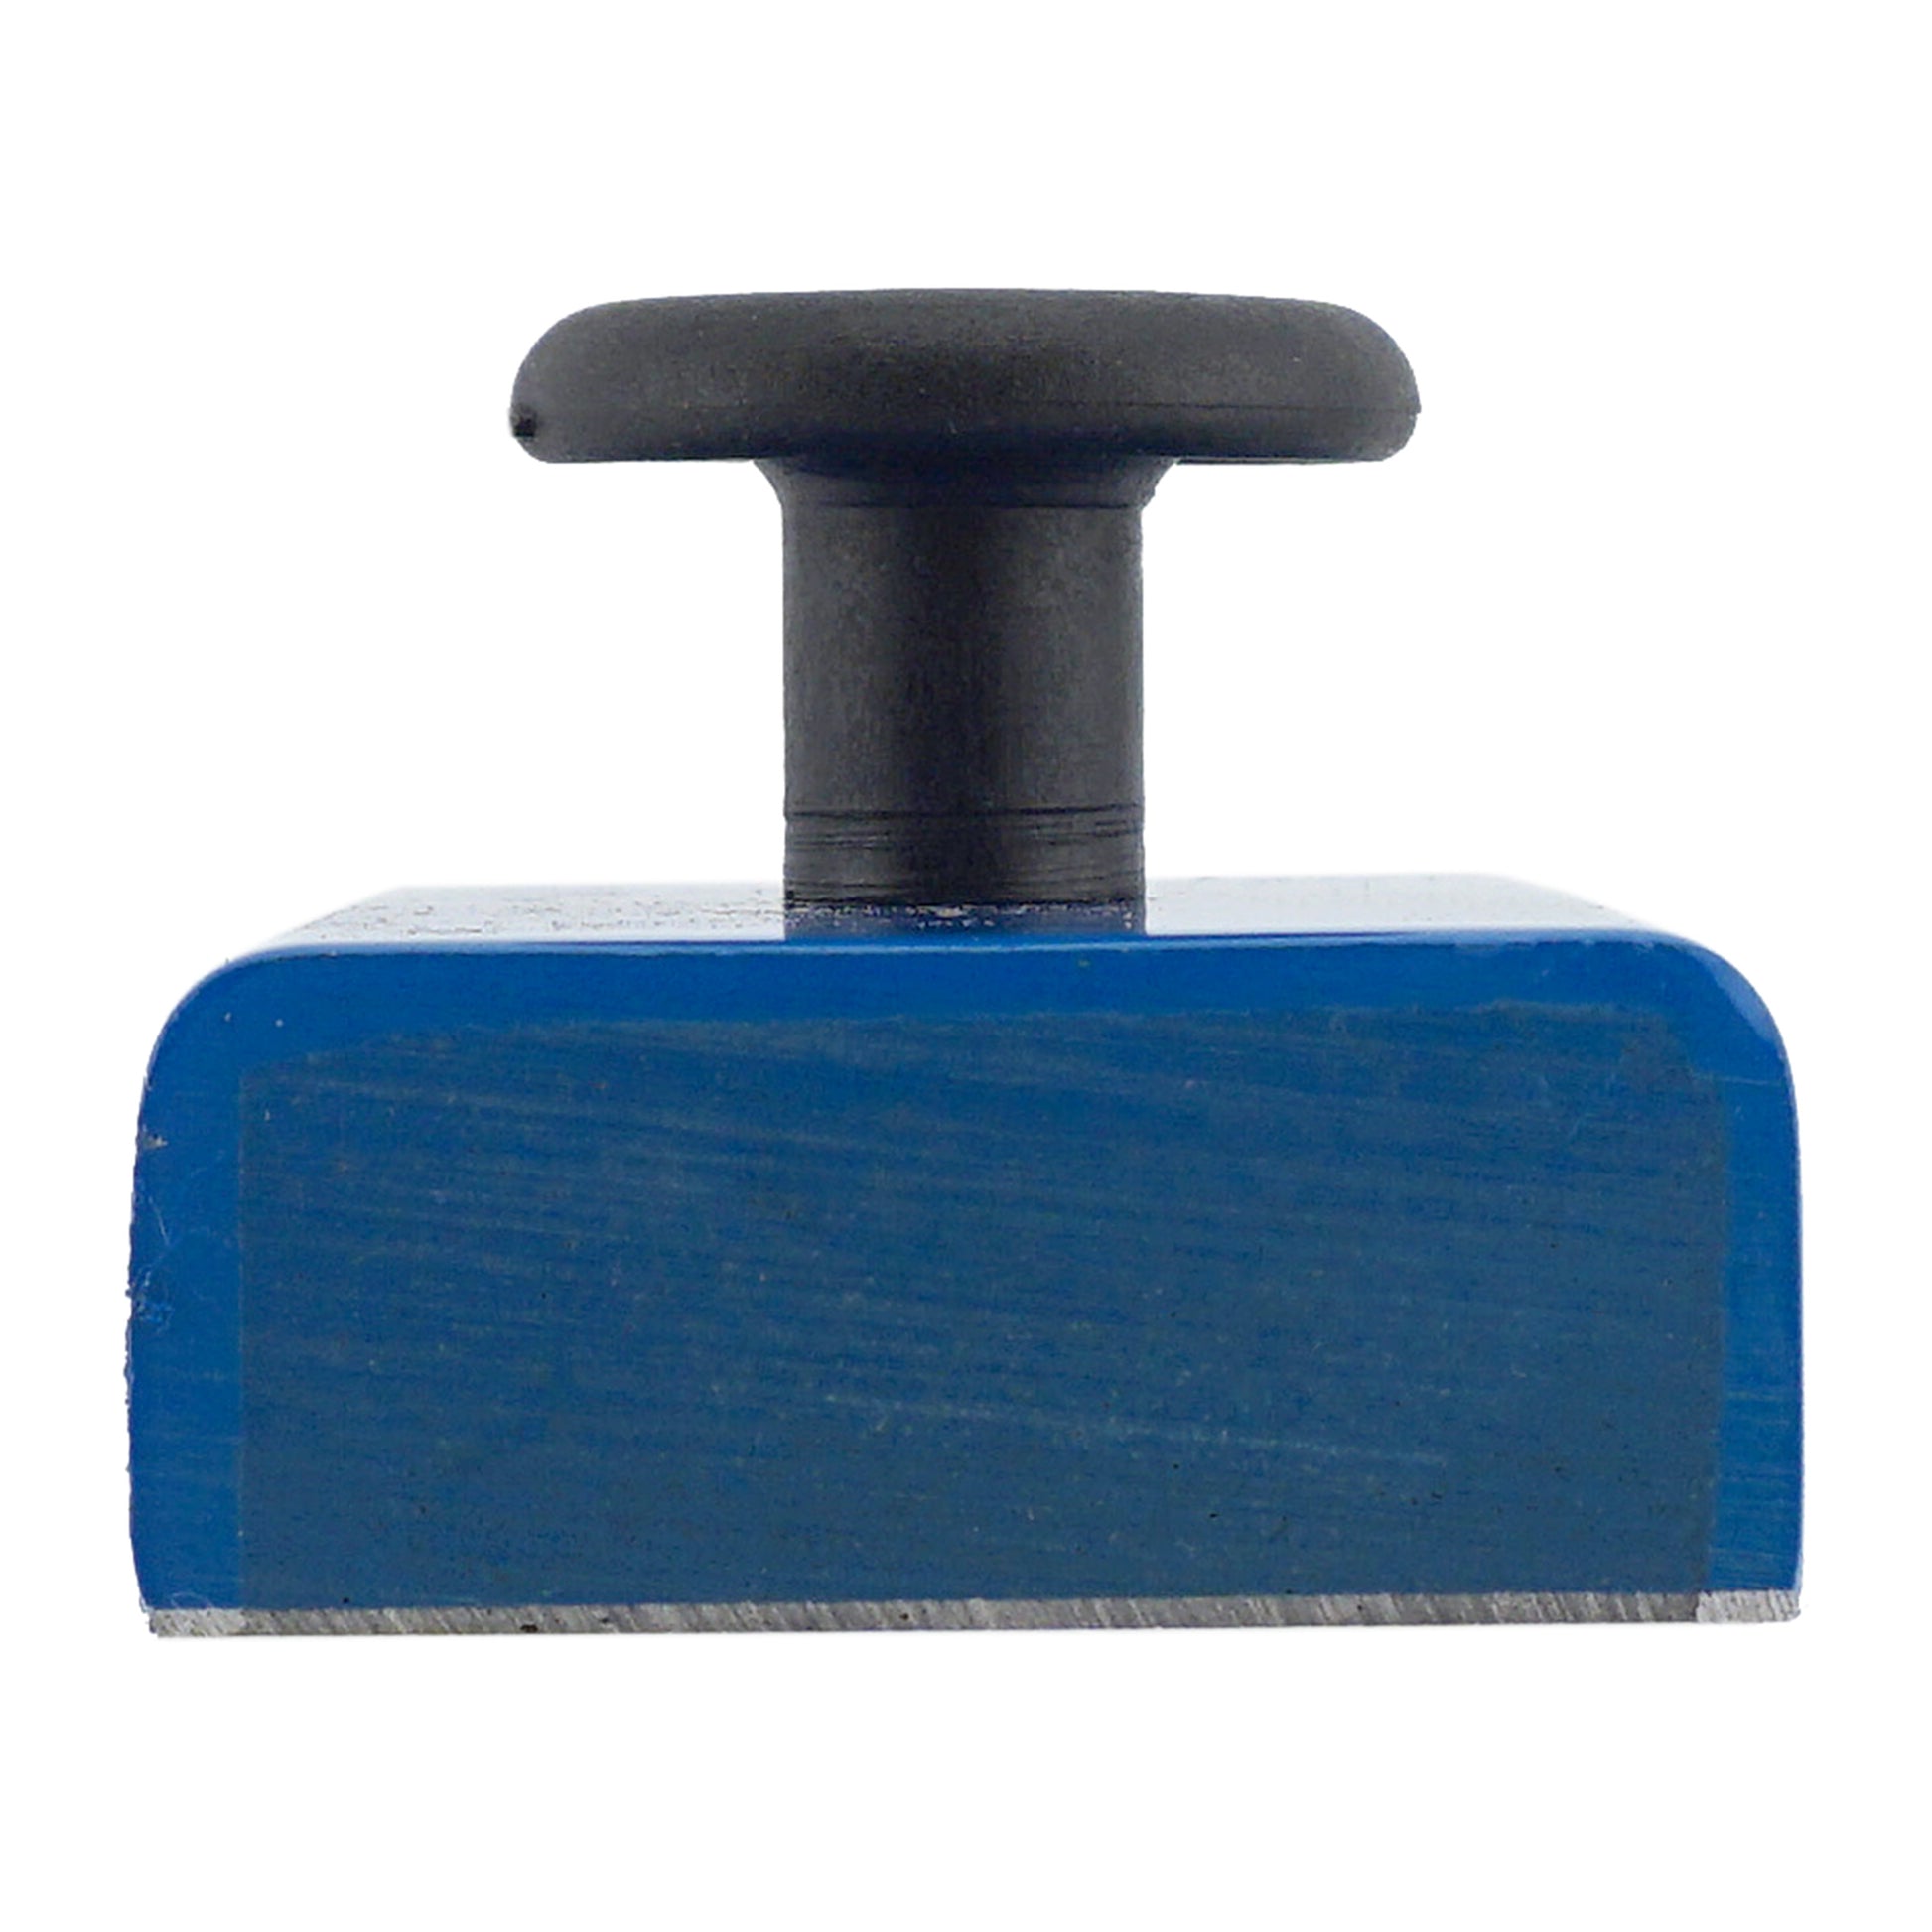 Load image into Gallery viewer, HMKS-C Ceramic Rectangular Base Magnet with Knob - Side View